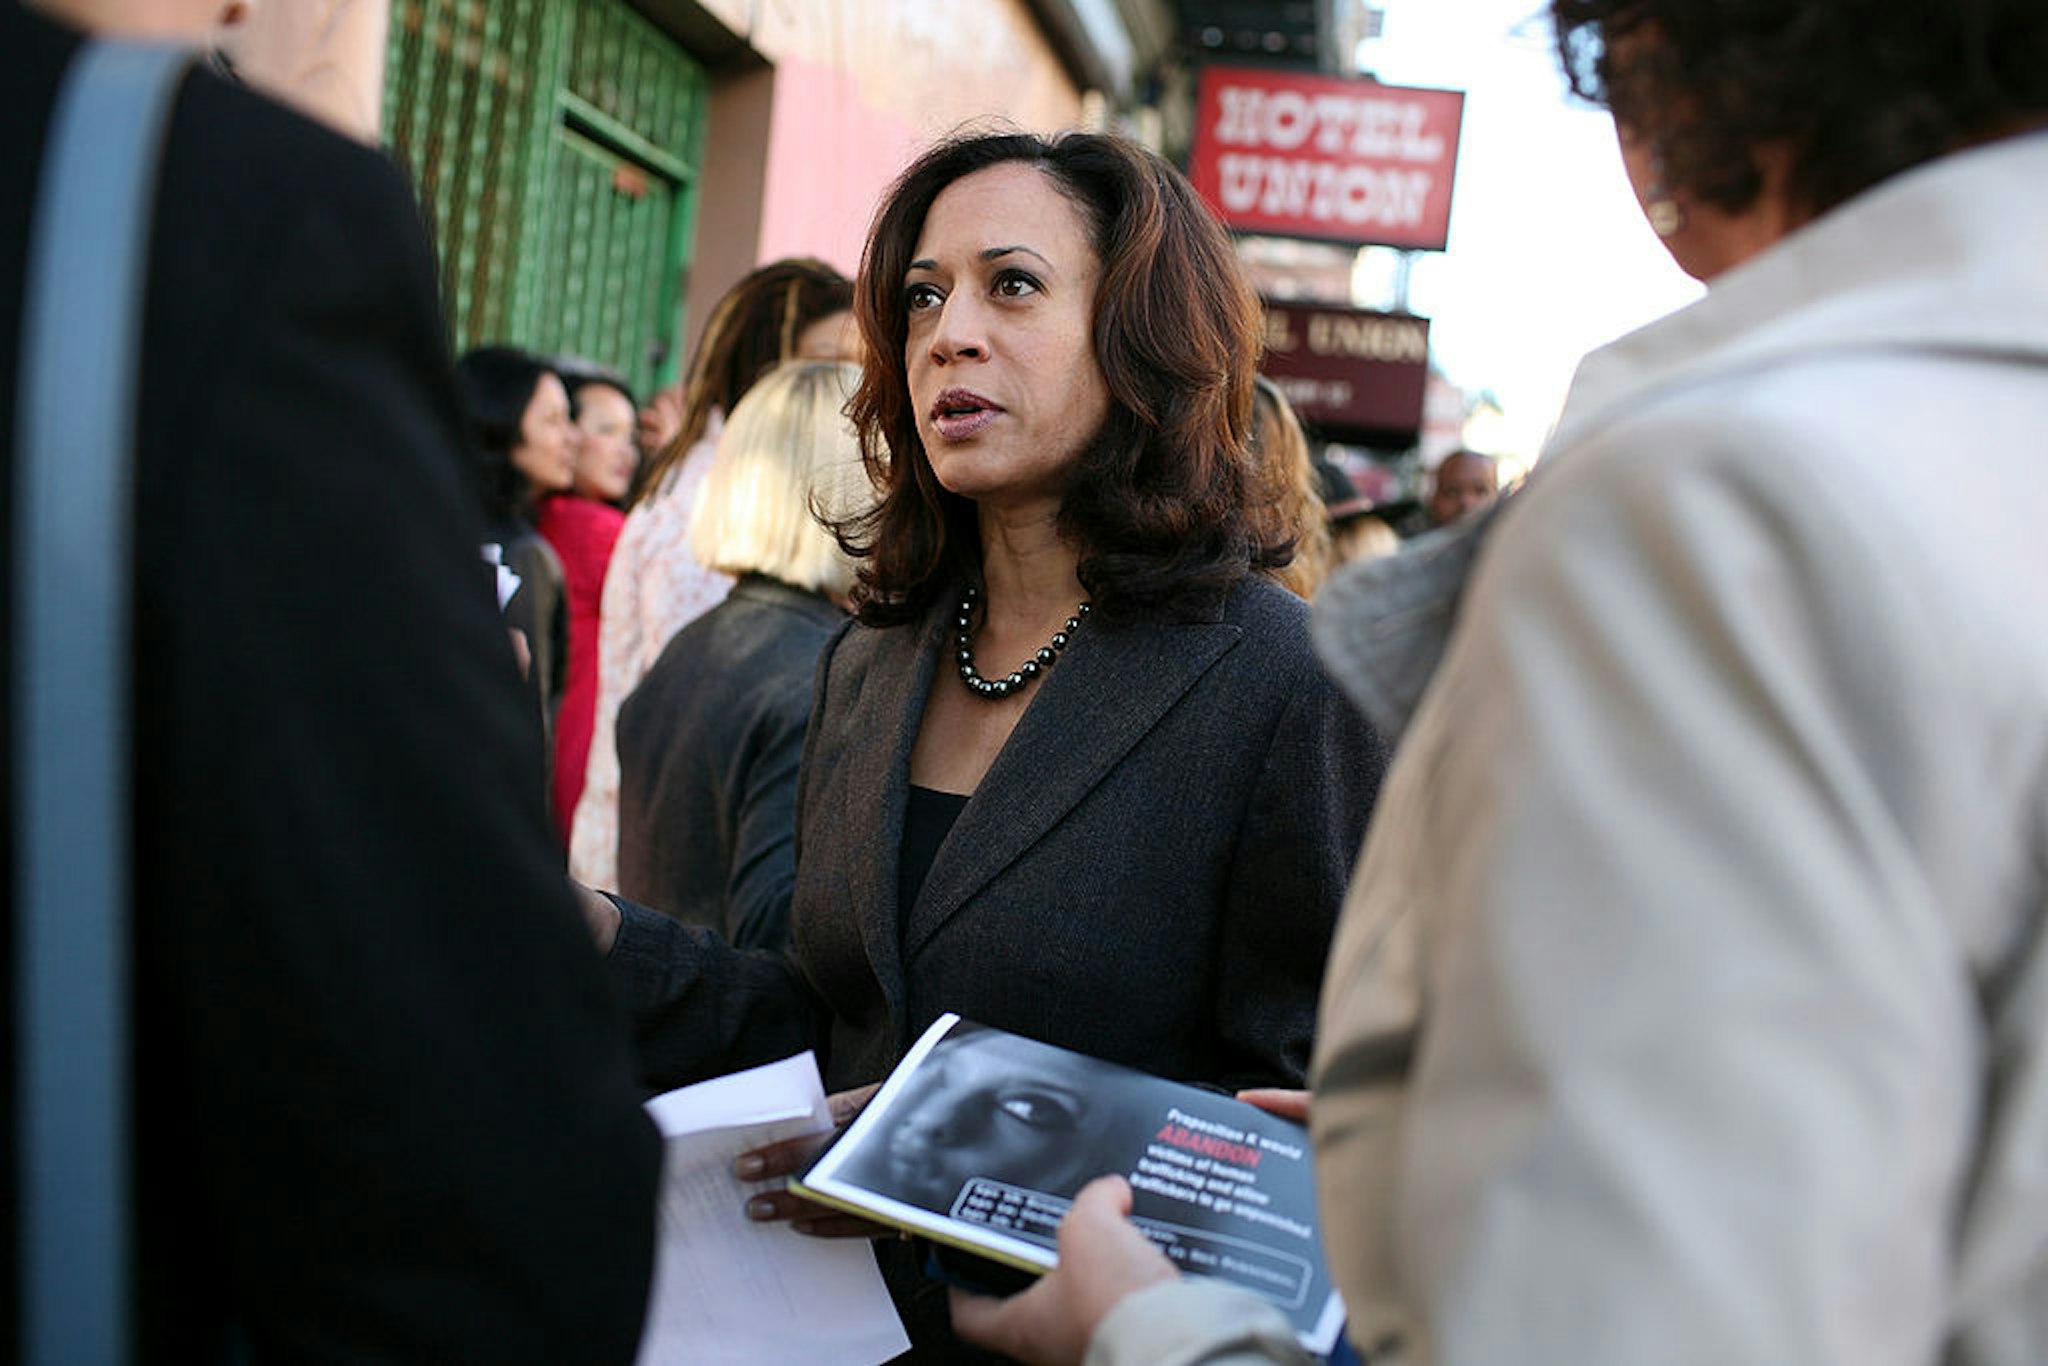 SAN FRANCISCO - OCTOBER 29: San Francisco District Attorney Kamala Harris speaks to supporters before a No on K press conference October 29, 2008 in San Francisco, California. San Francisco ballot measure Proposition K seeks to stop enforcing laws against prostitution. (Photo by Justin Sullivan/Getty Images)